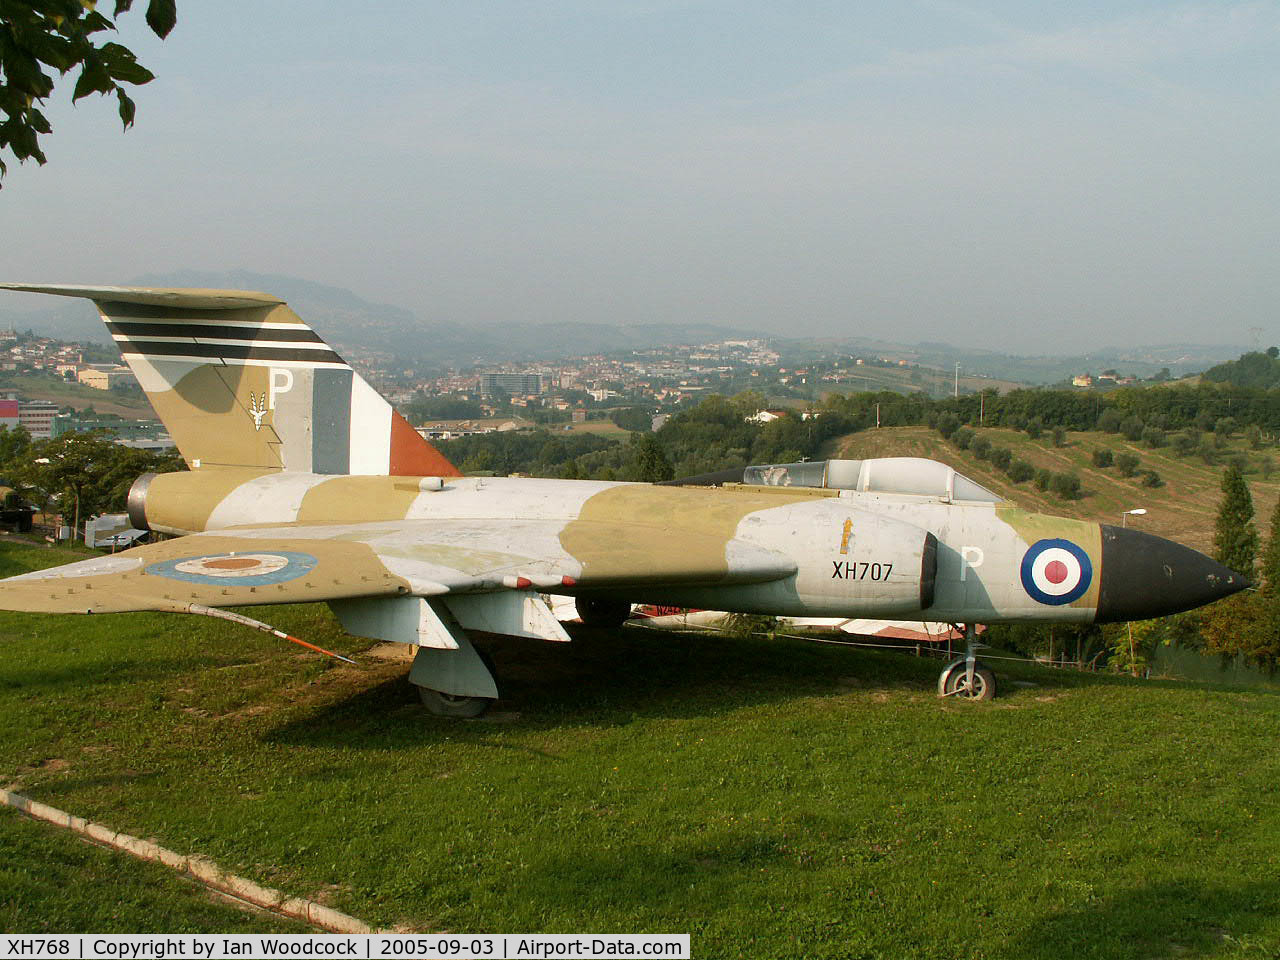 XH768, 1959 Gloster Javelin FAW.9 C/N Not found XH768, Glaoster Javelin FAW.9/Preserved/Cerbaiola,Emilia-Romagna (marked as XH707)